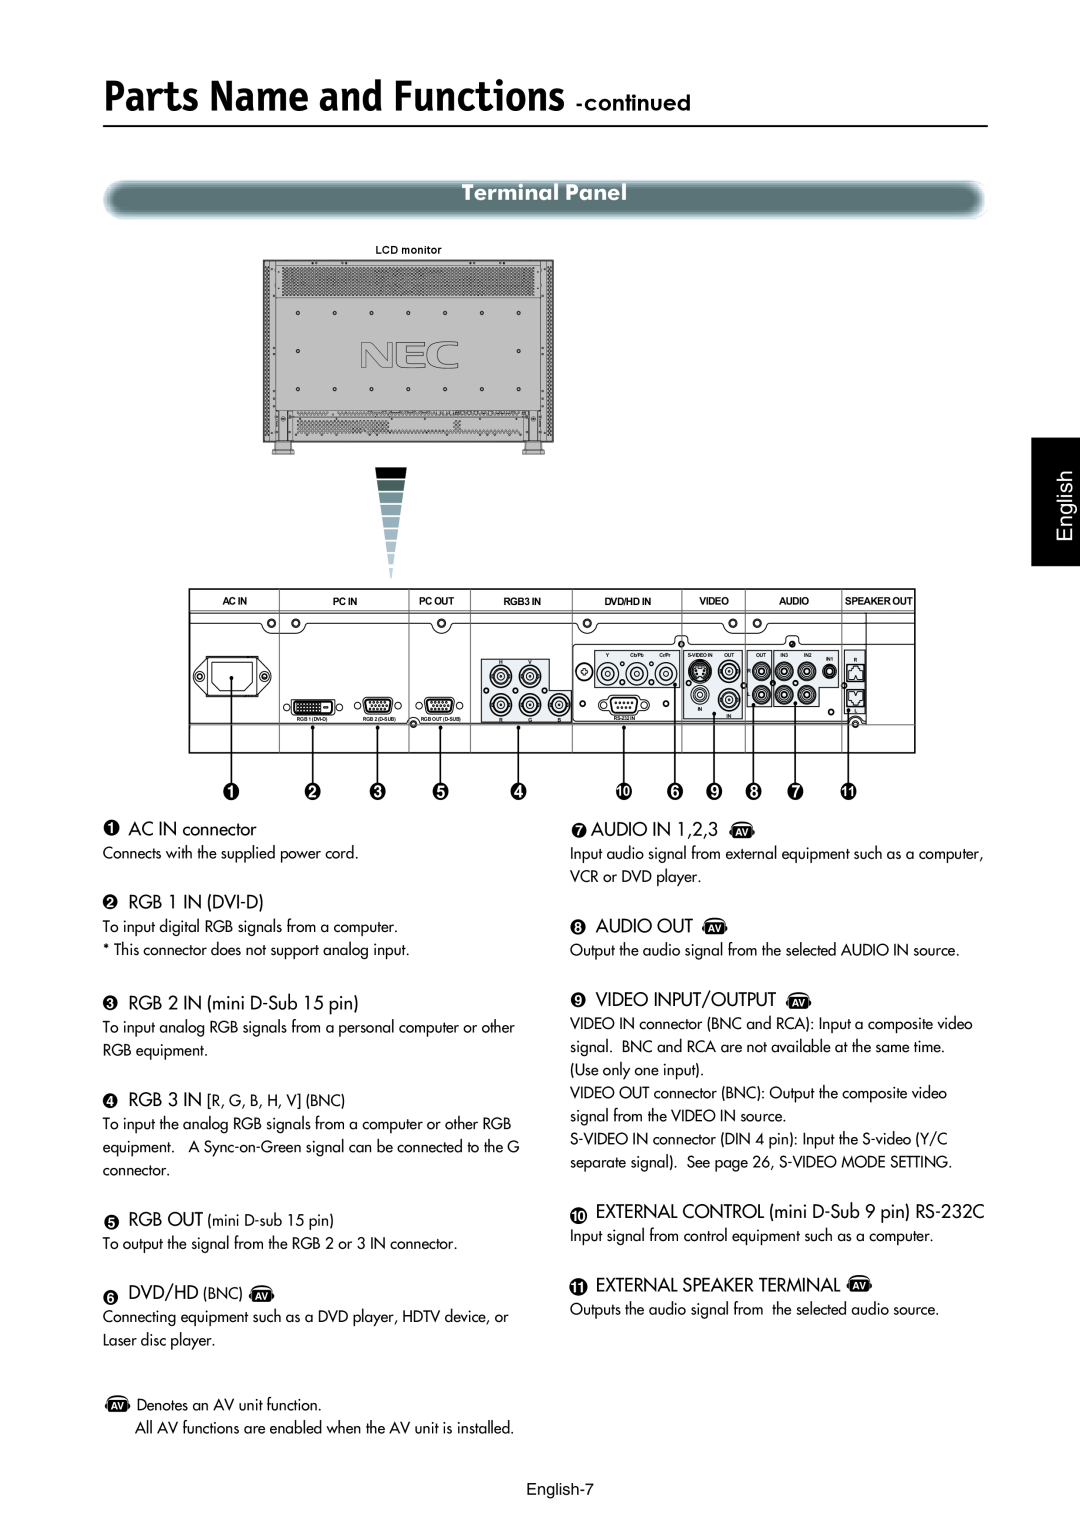 NEC LCD3210 manual Parts Name and Functions -continued, Terminal Panel, English-7 